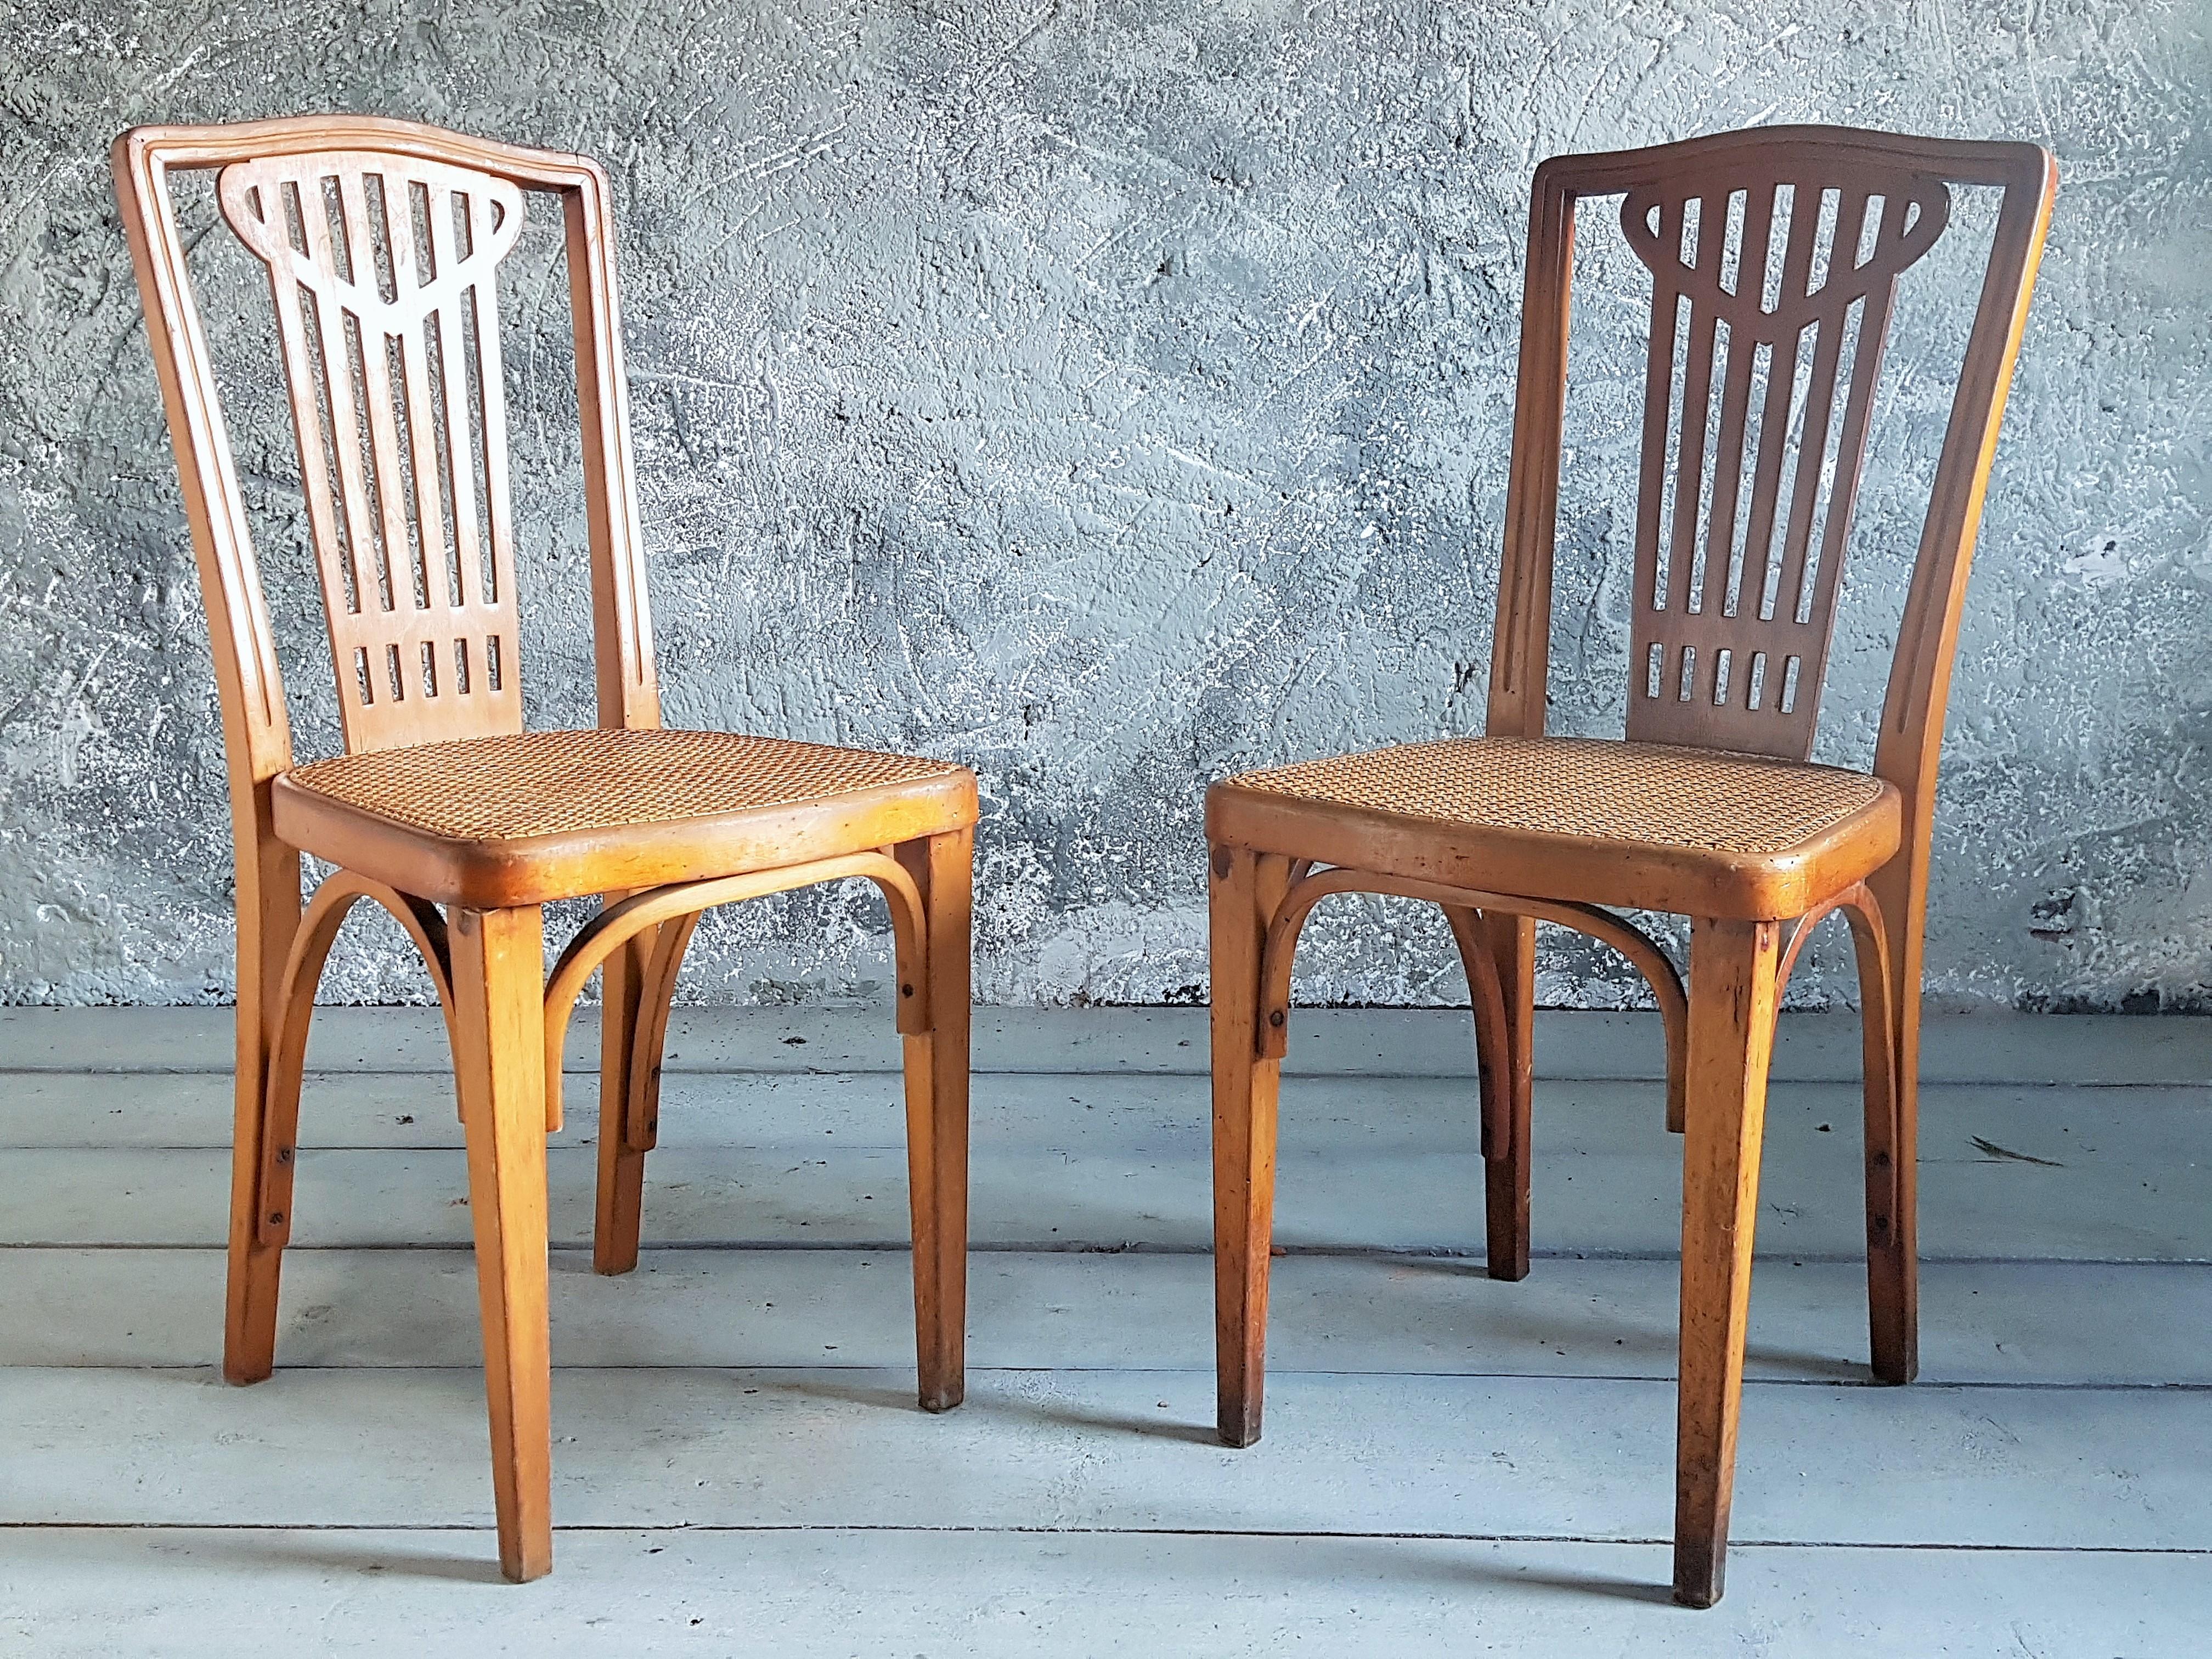 Set of 8 Thonet chairs, bentwood with viennese braid. all signed.

As found condition.

All chairs a solid and stable. 

4 of the braids are perfect, 4 have small lesions, still ok for seating.